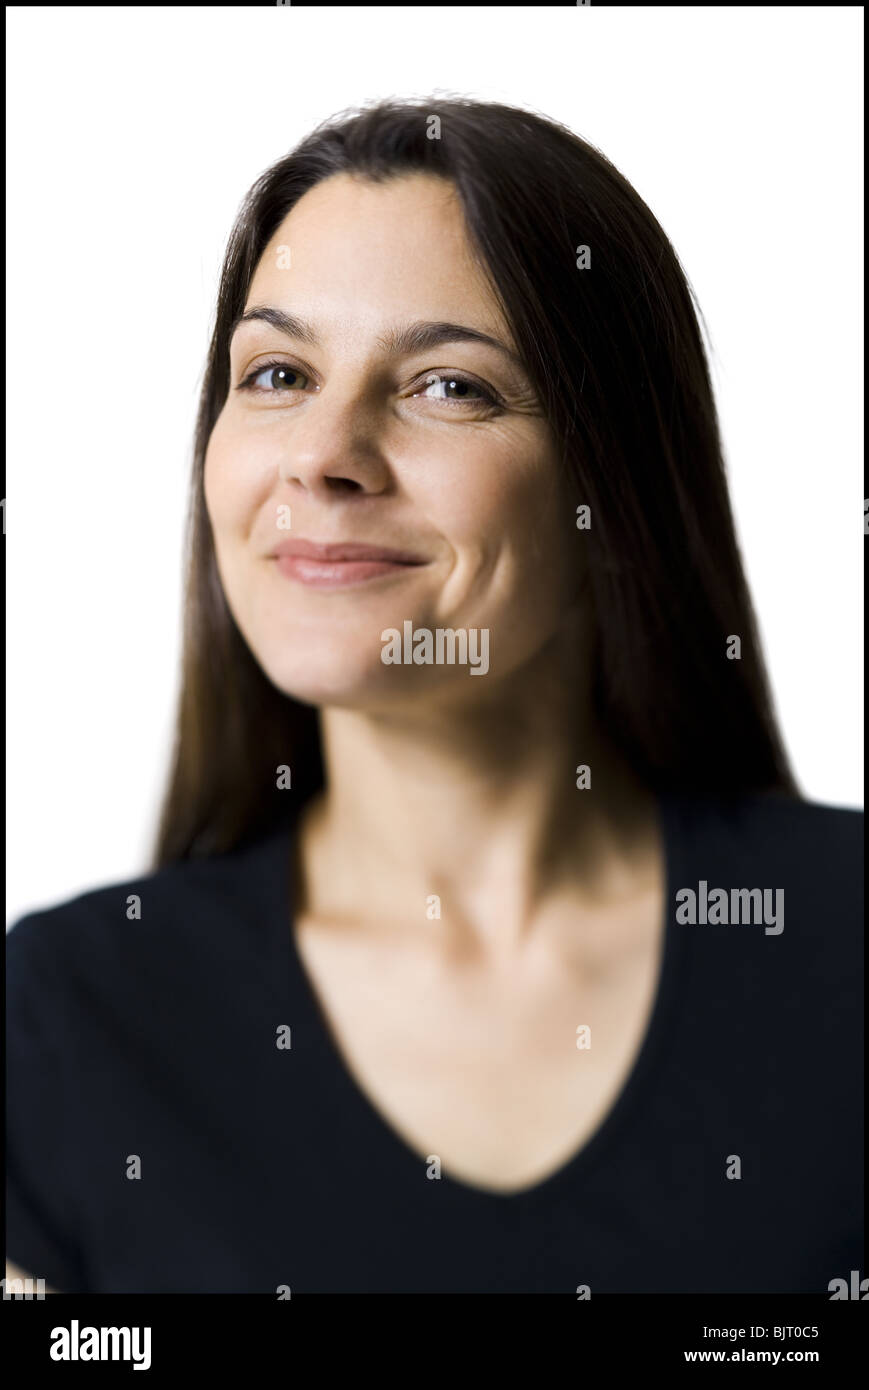 Woman smiling and posing Stock Photo